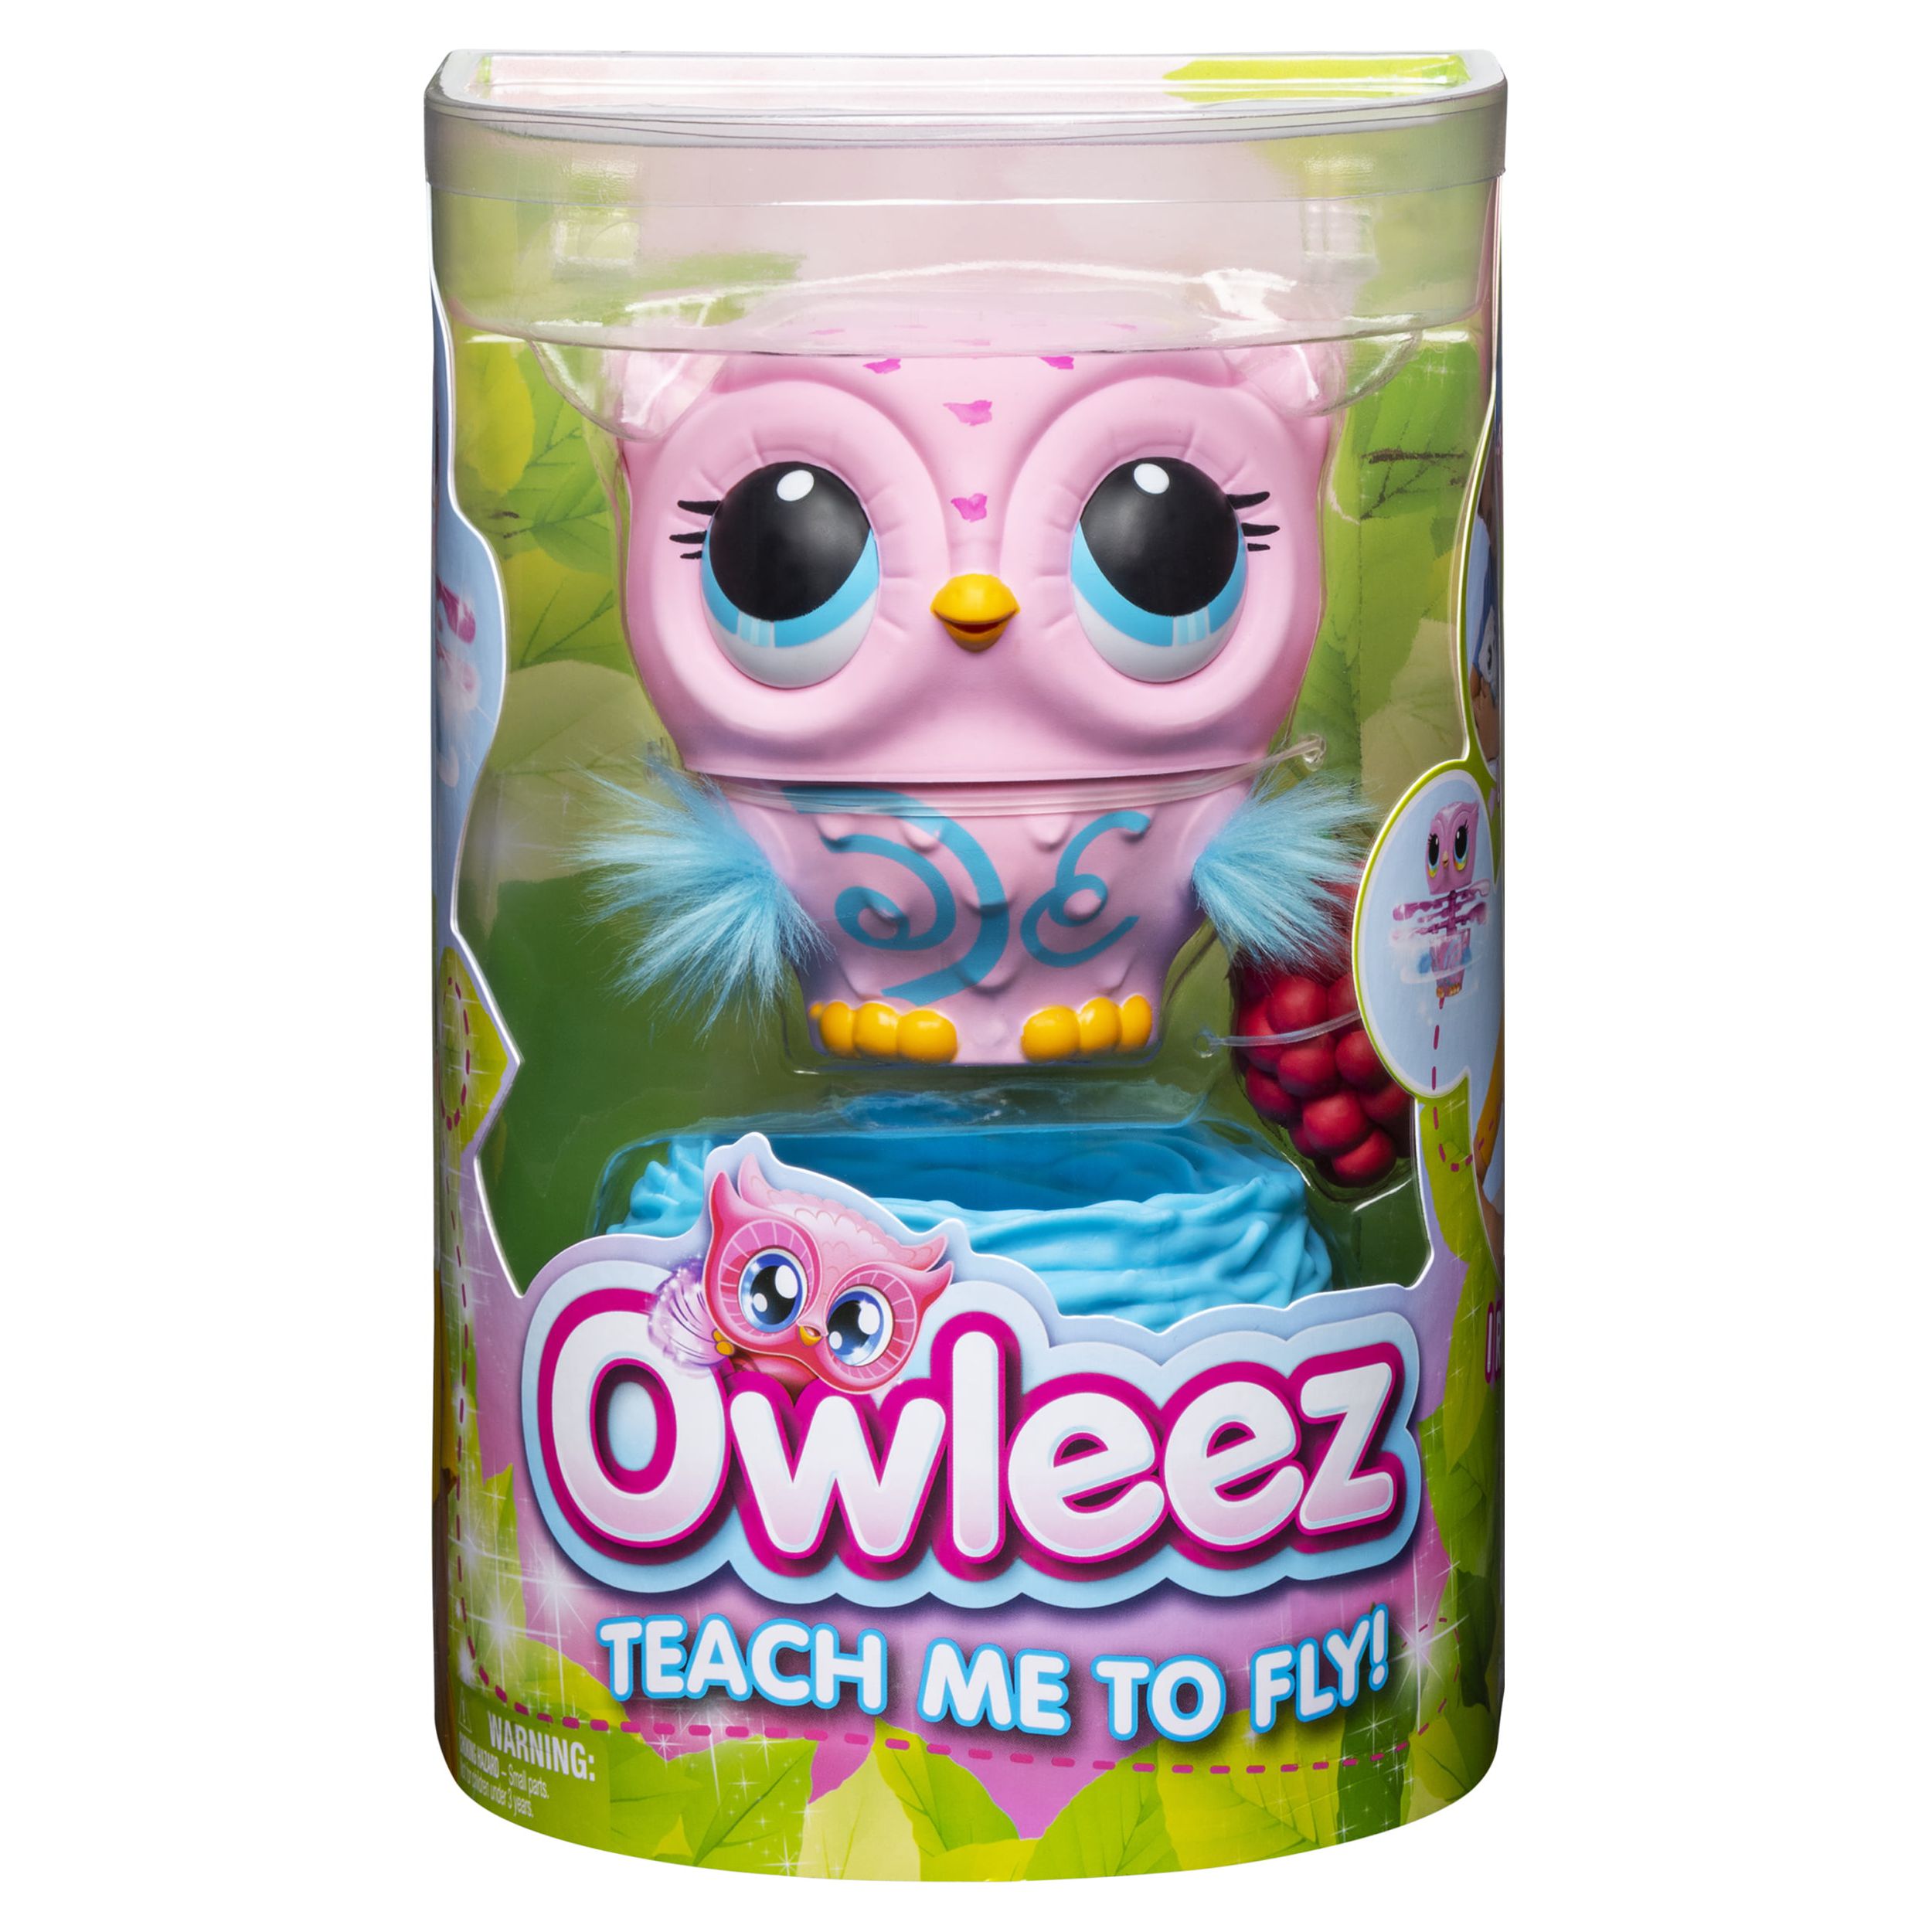 Owleez Flying Baby Owl Interactive Toy with Lights and Sounds (Pink) - image 3 of 8